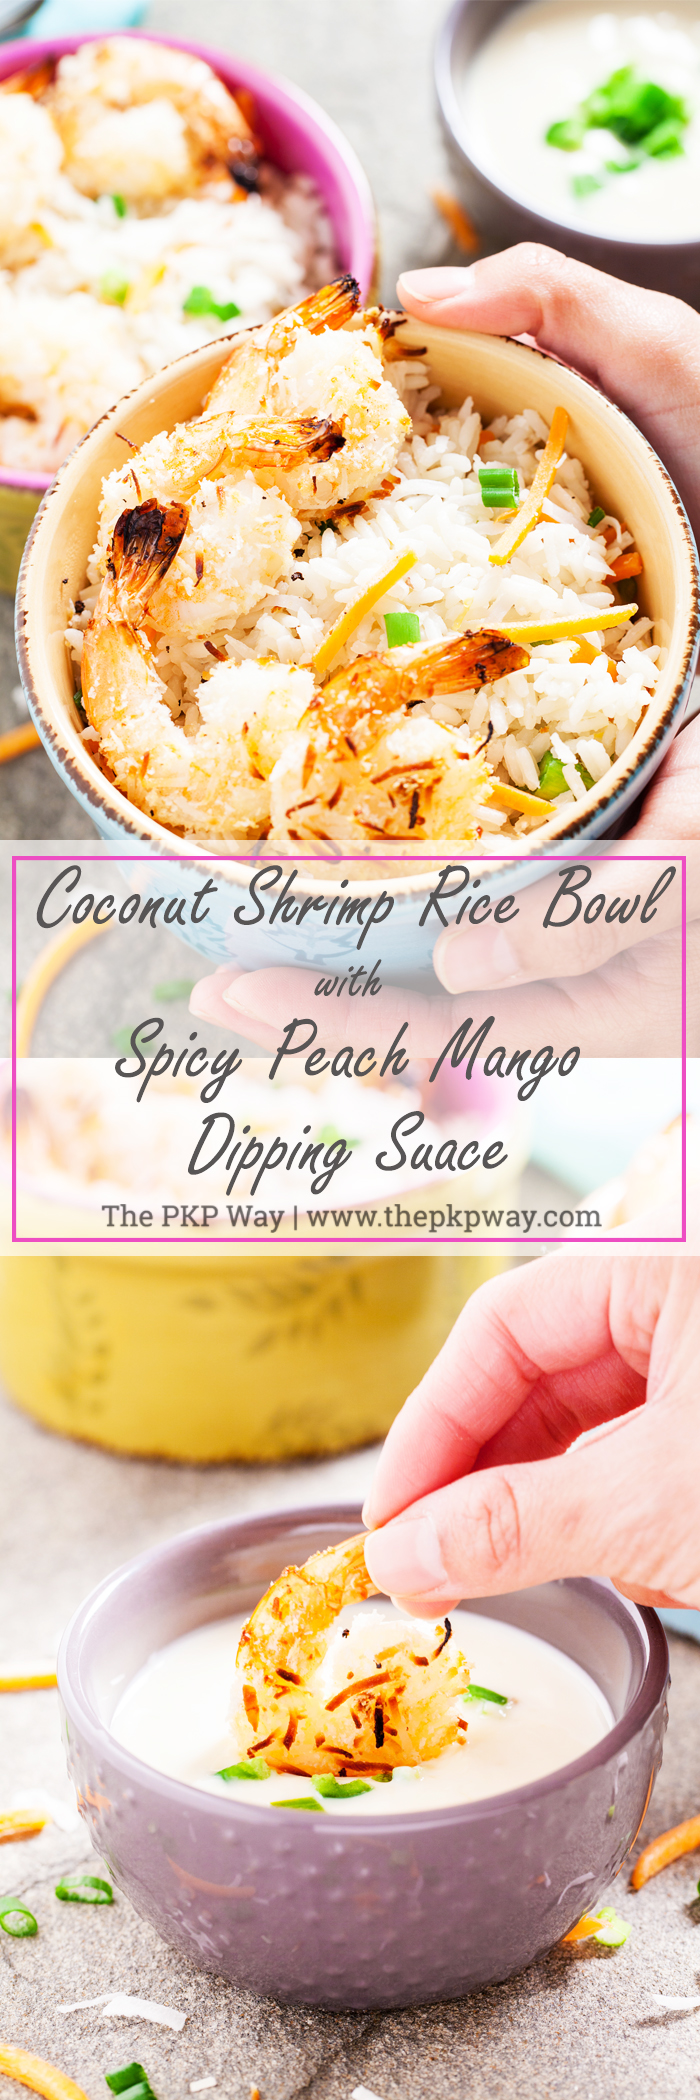 Coconut Shrimp Rice Bowls with Spicy Peach and Mango ...